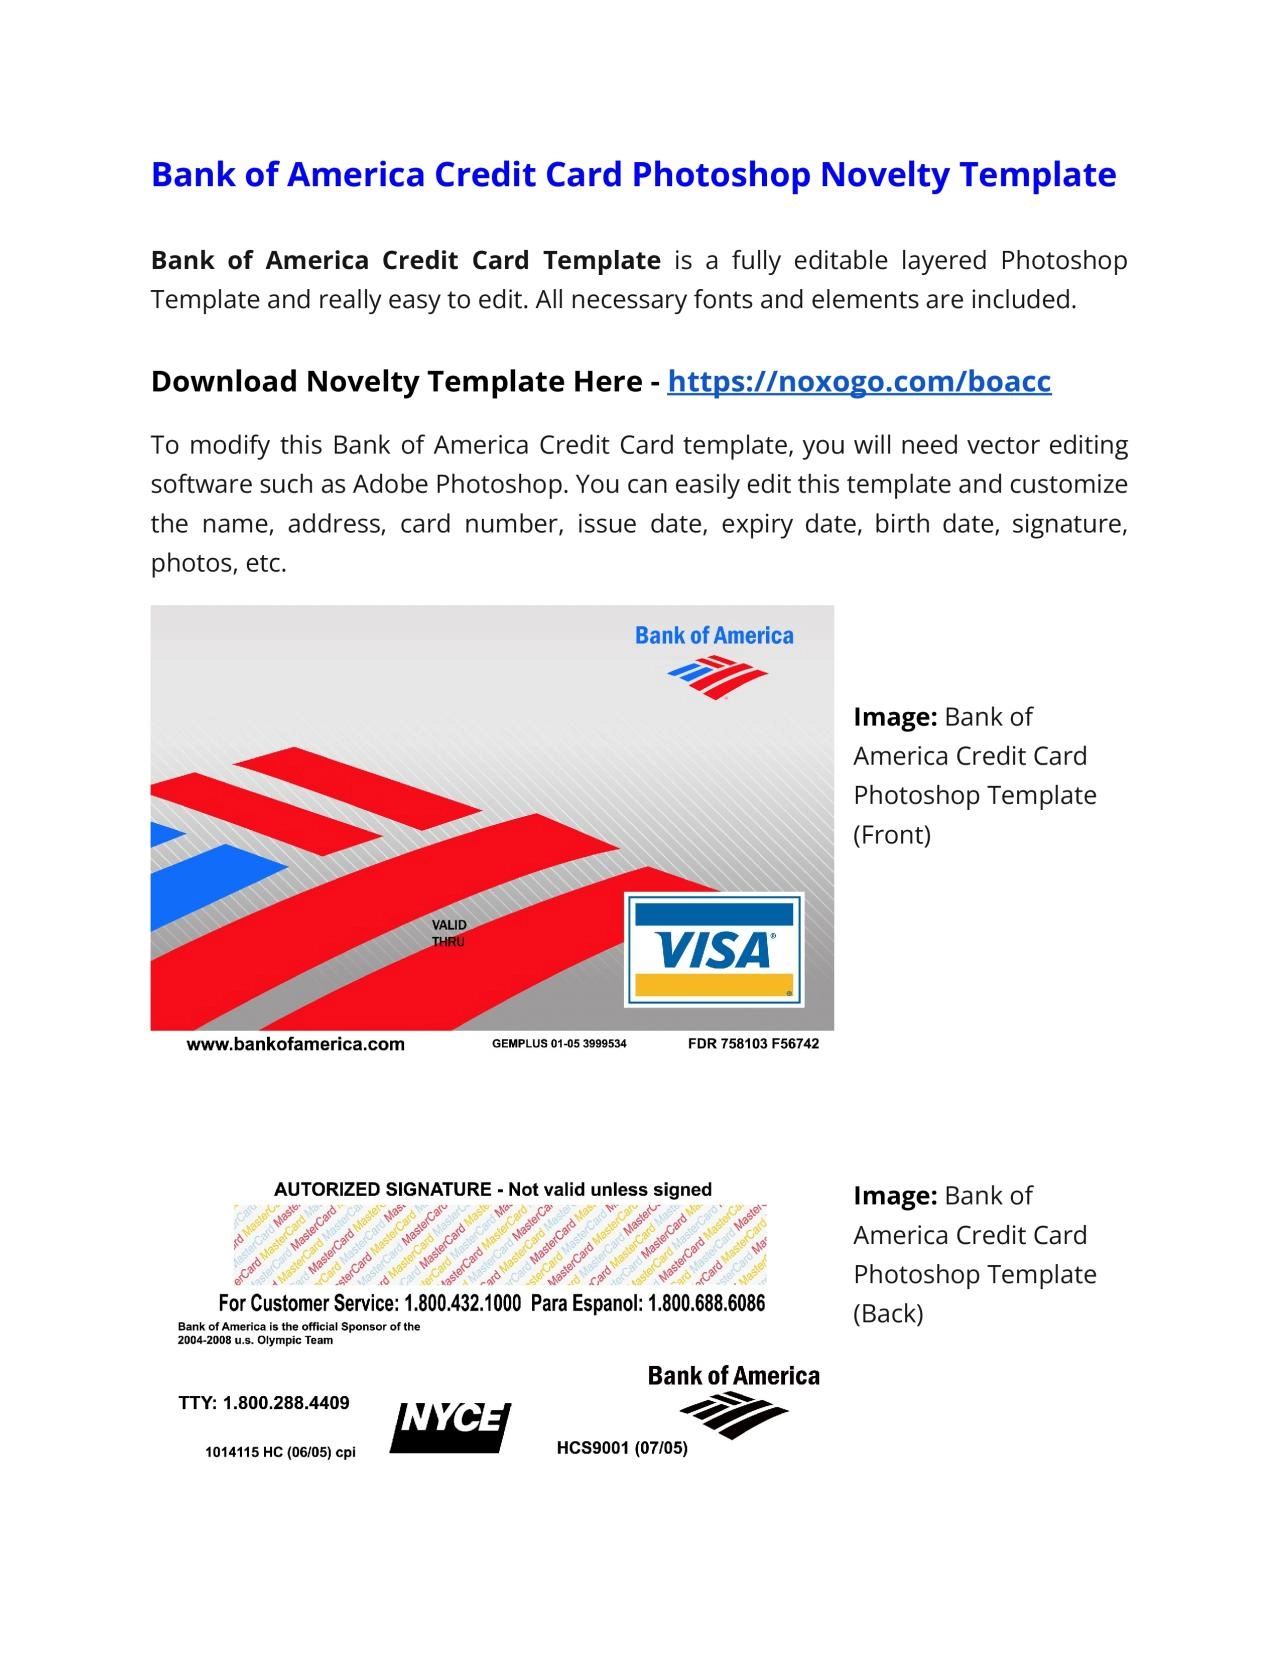 Bank of America Credit Card Photoshop Novelty Template